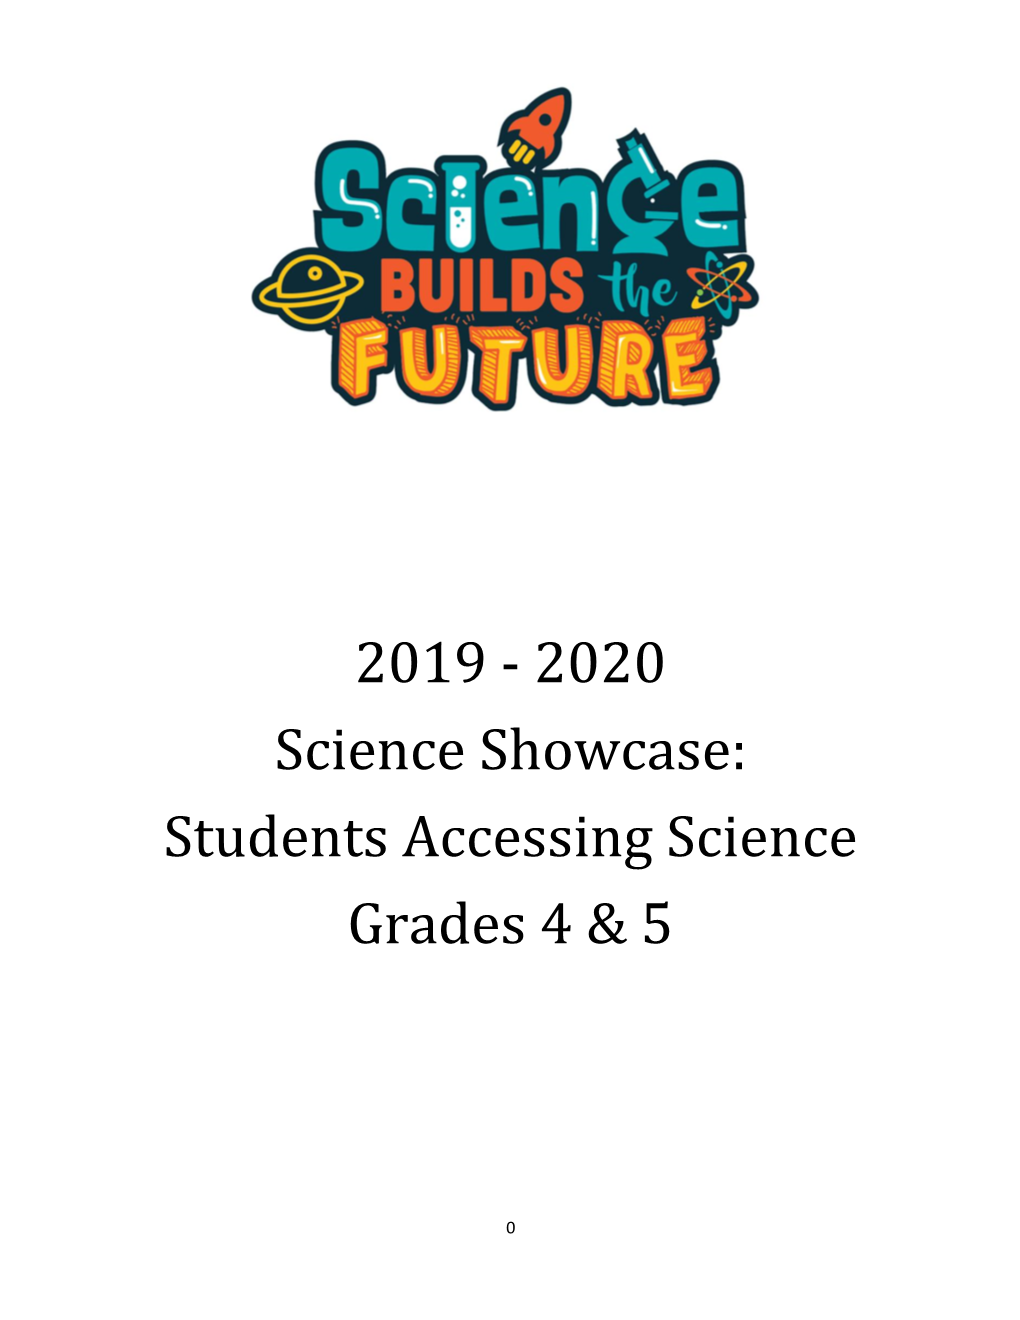 2019 - 2020 Science Showcase: Students Accessing Science Grades 4 & 5